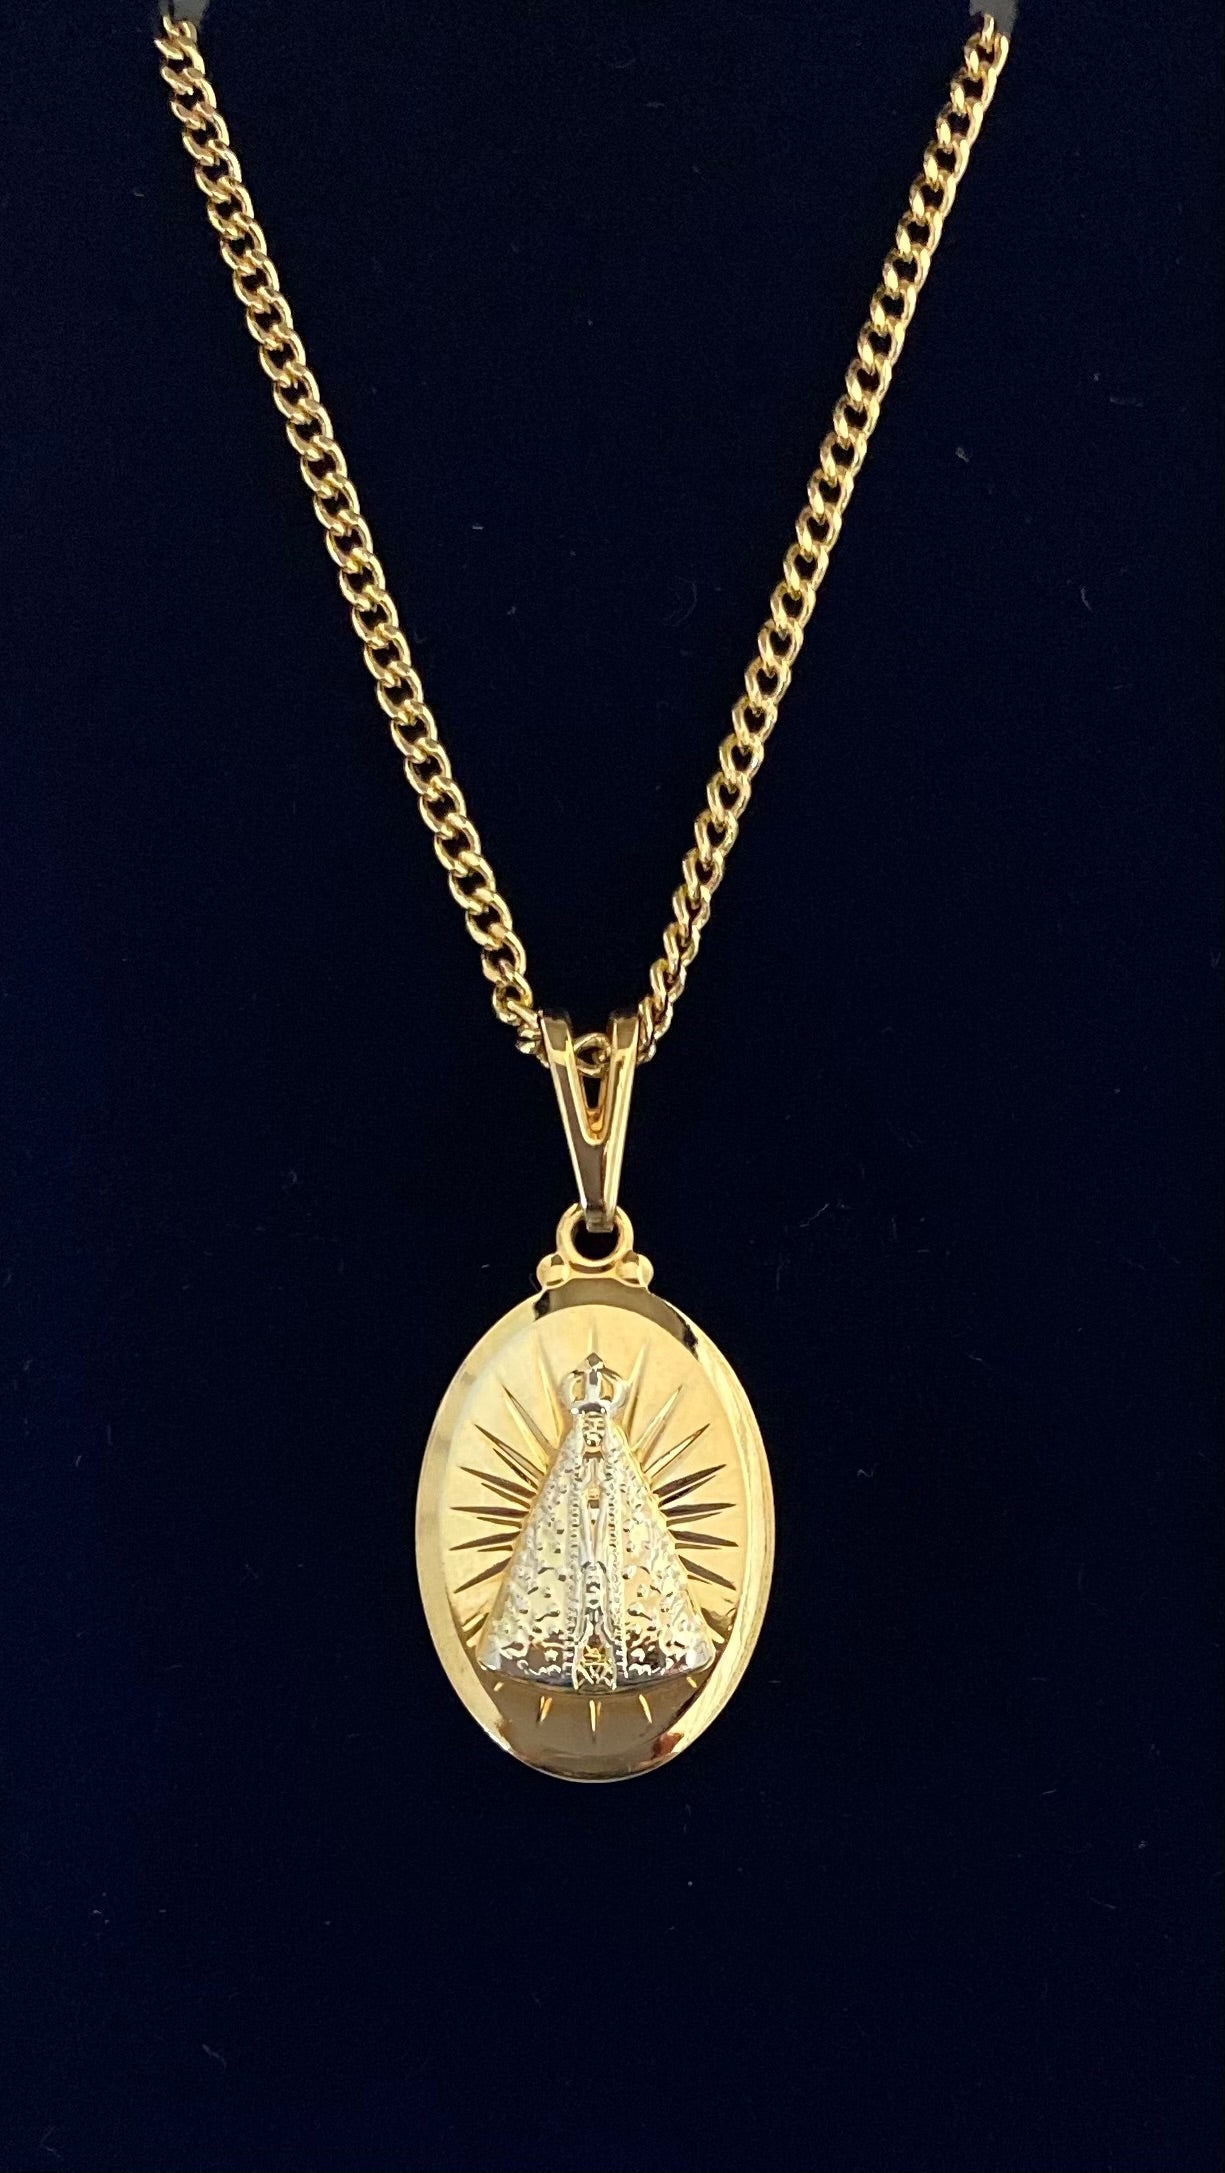 OurLady of Charity Charm and Chain 14k GF